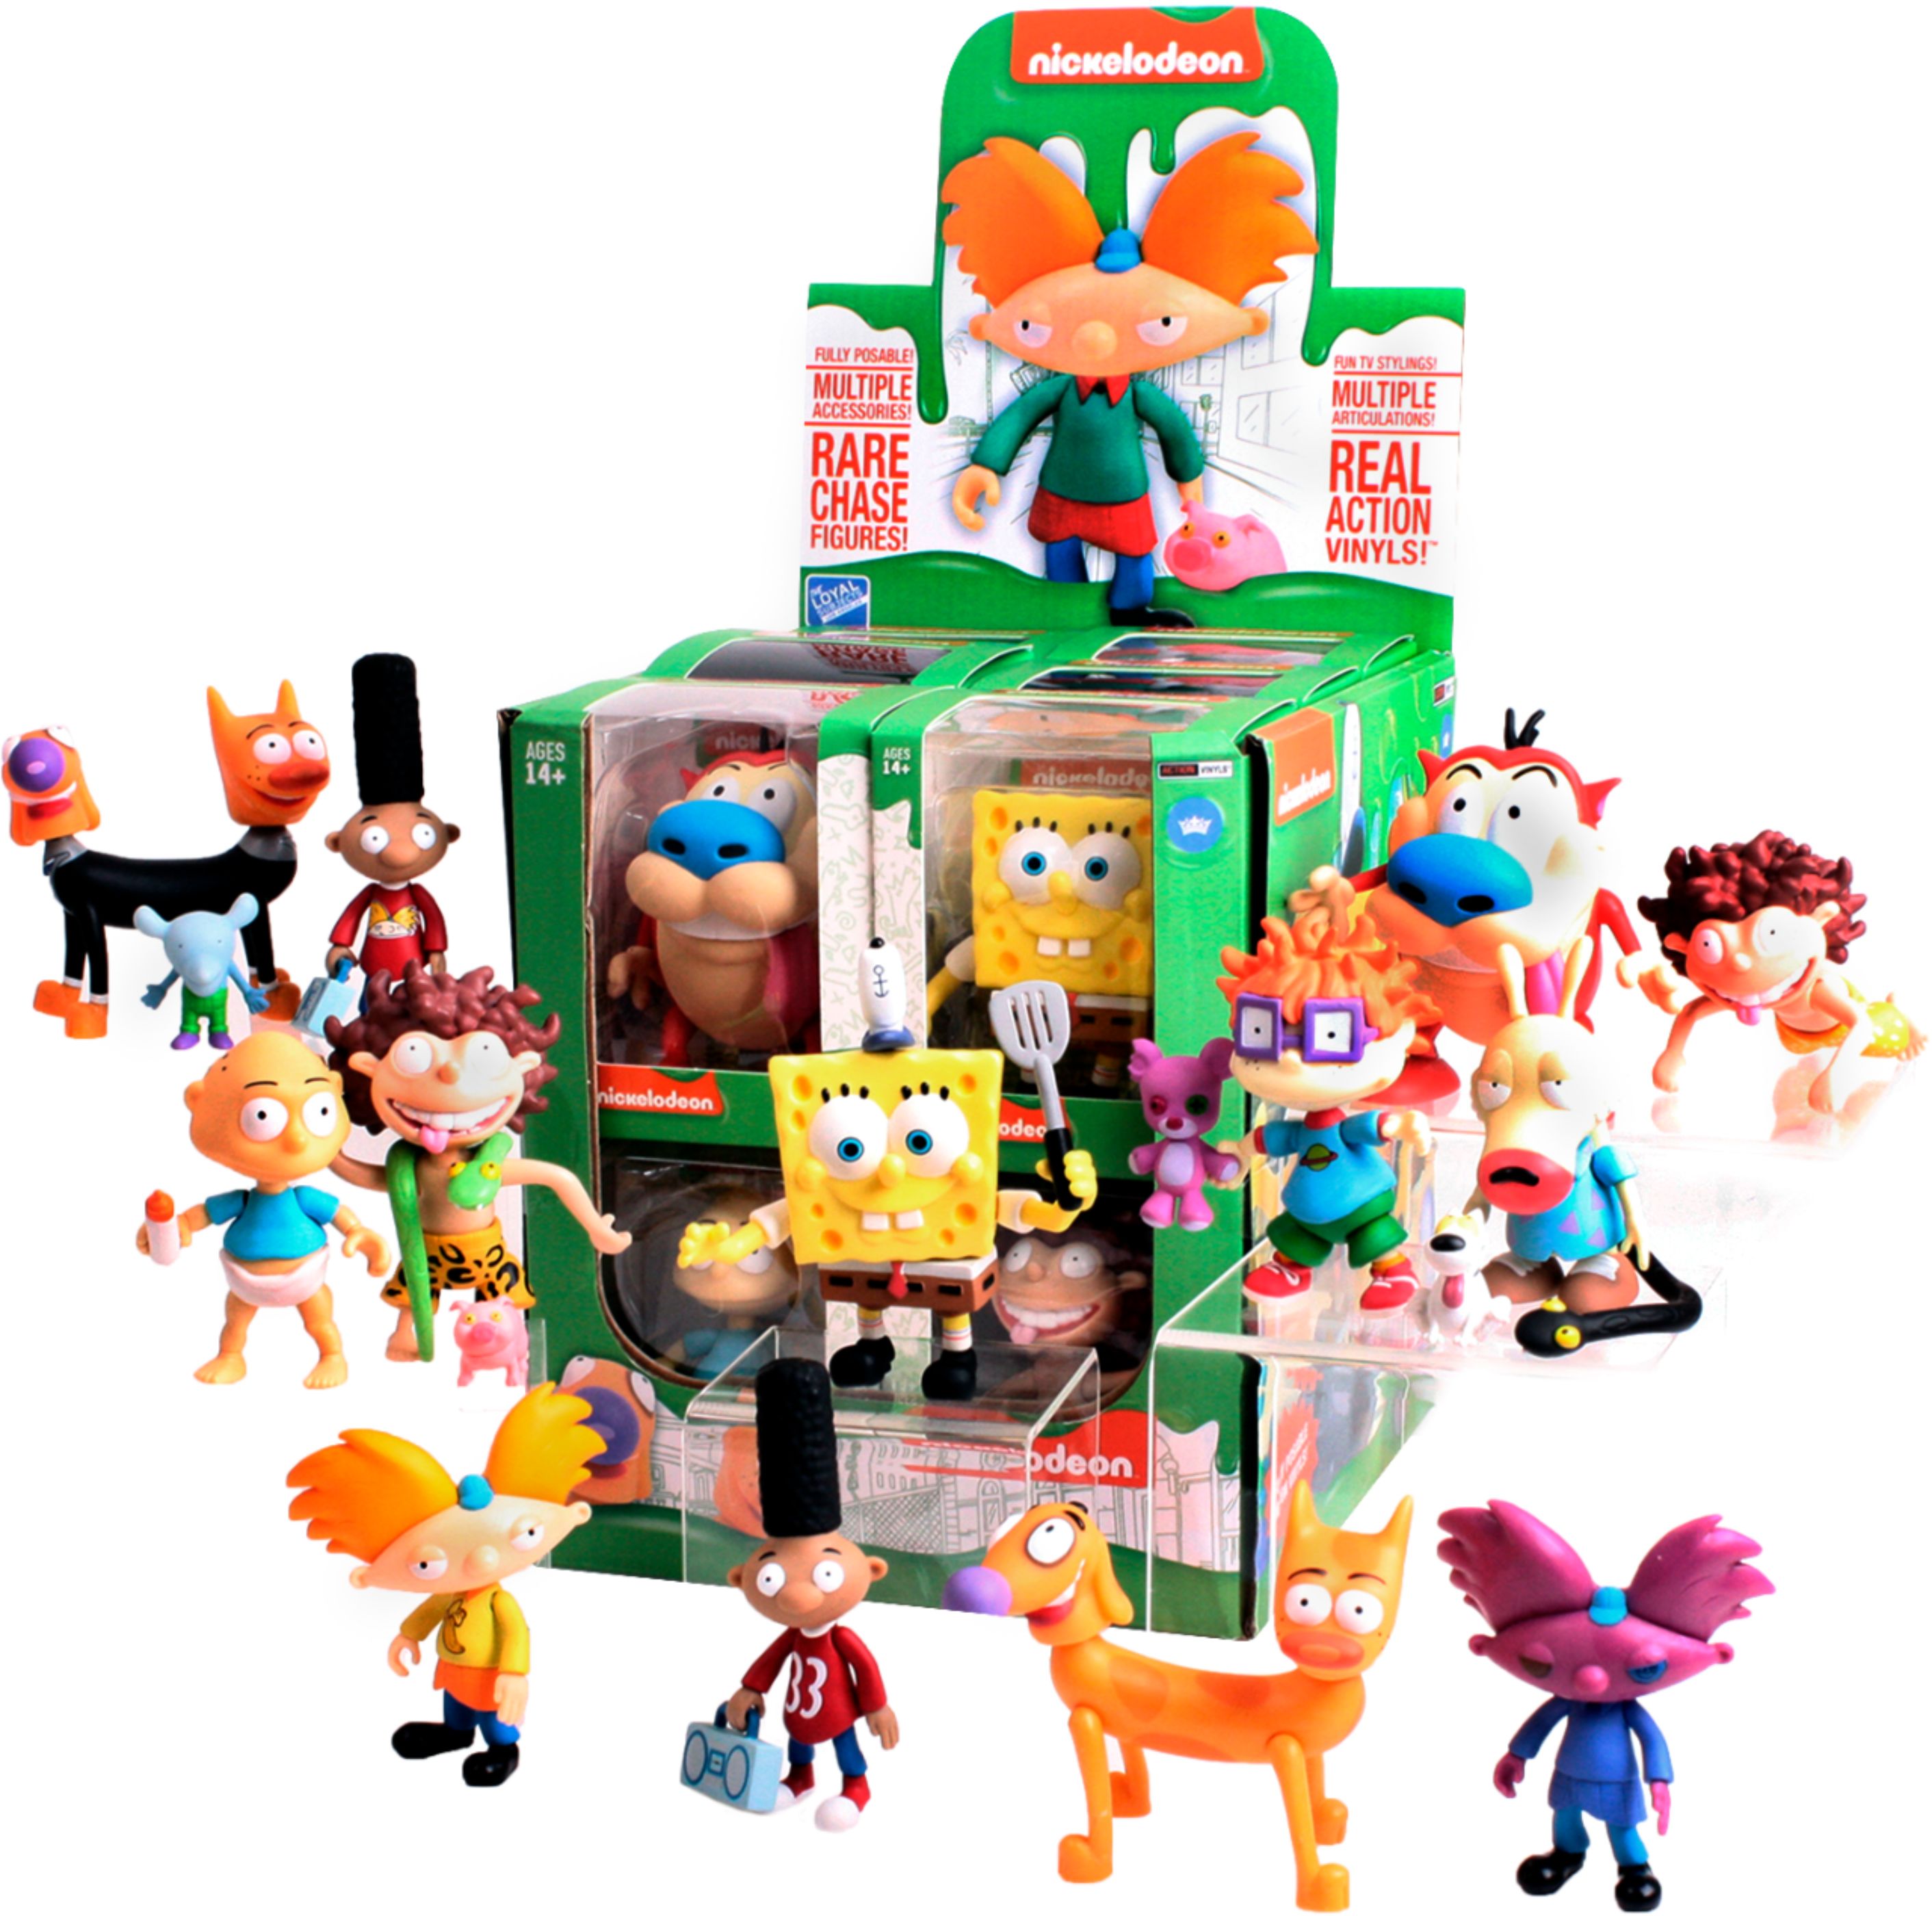 Arnold The Loyal Subjects Nickelodeon Action Vinyls 